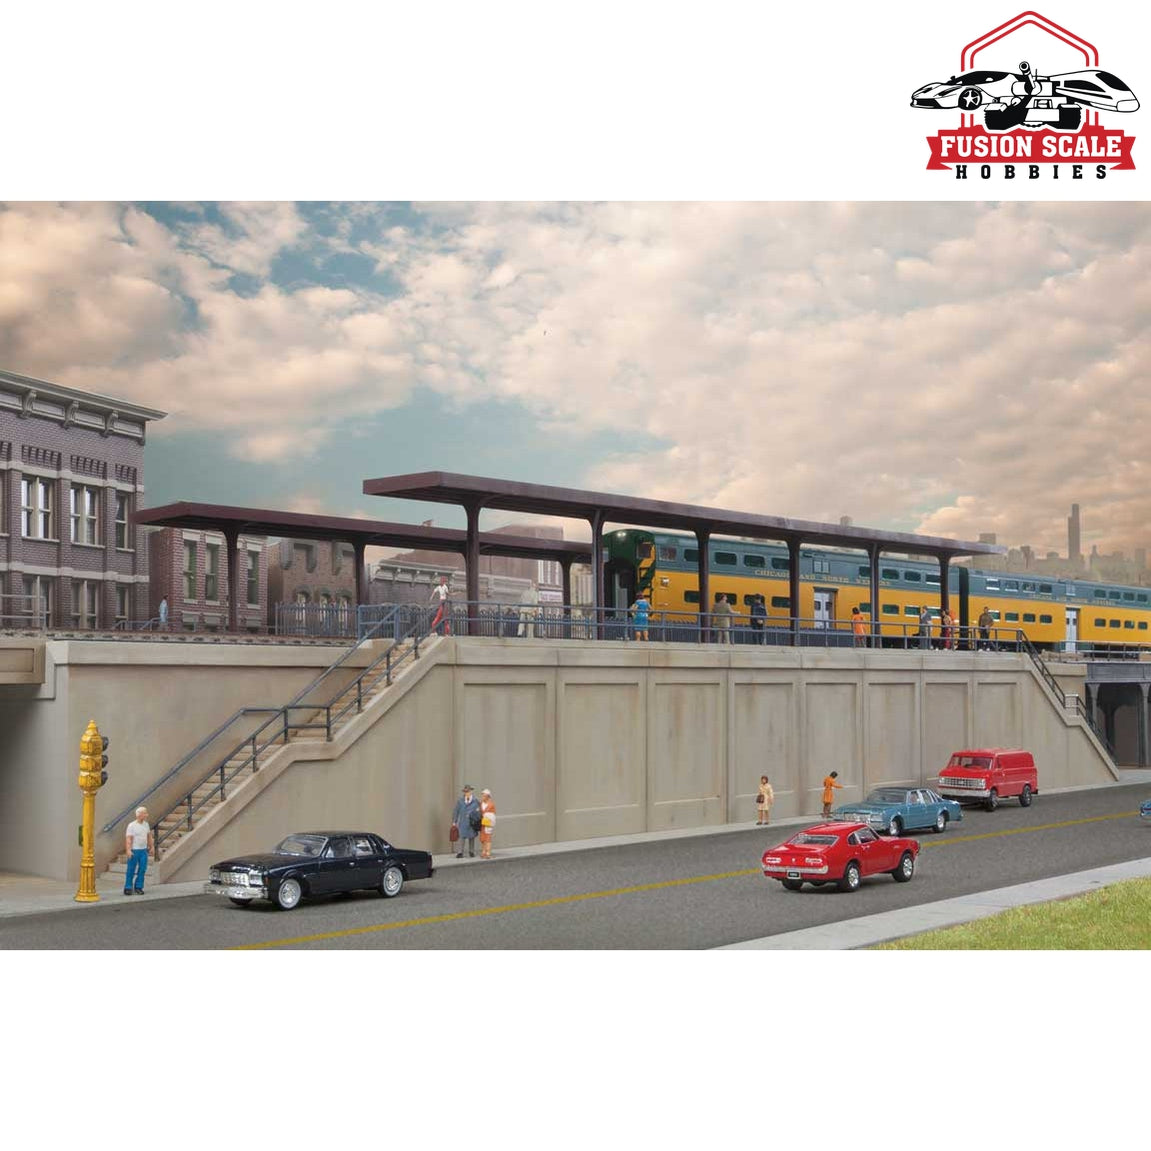 Walthers Cornerstone HO Scale Elevated Commuter Station Kit 201/2 x 67/8 x 411/16"  52 x 17.4 x 11.9cm